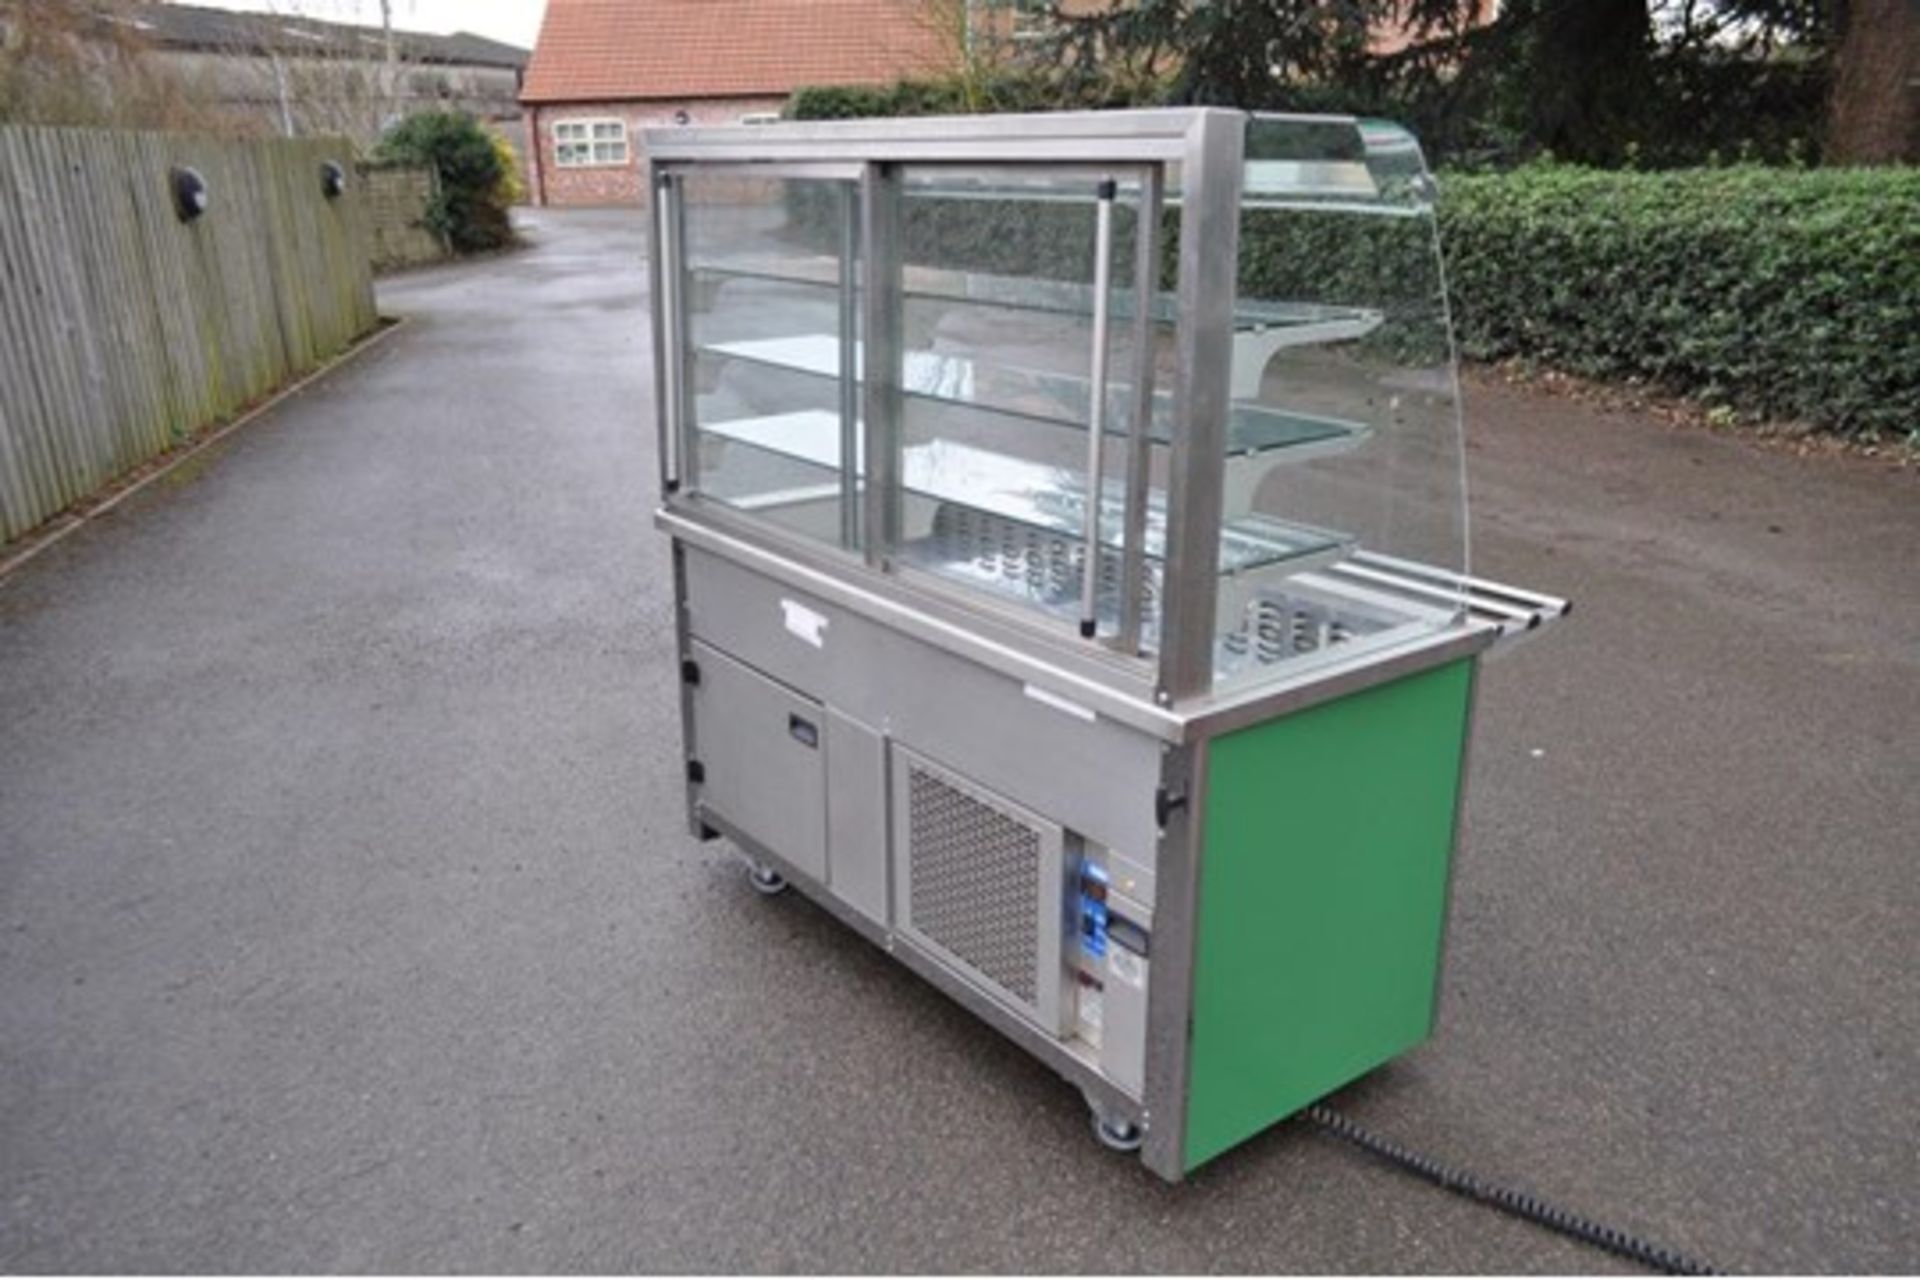 Moffat Refrigerated Counter Section With Chilled Display over 1490mm Serial number 32010/01/09 2BEl - Image 2 of 3